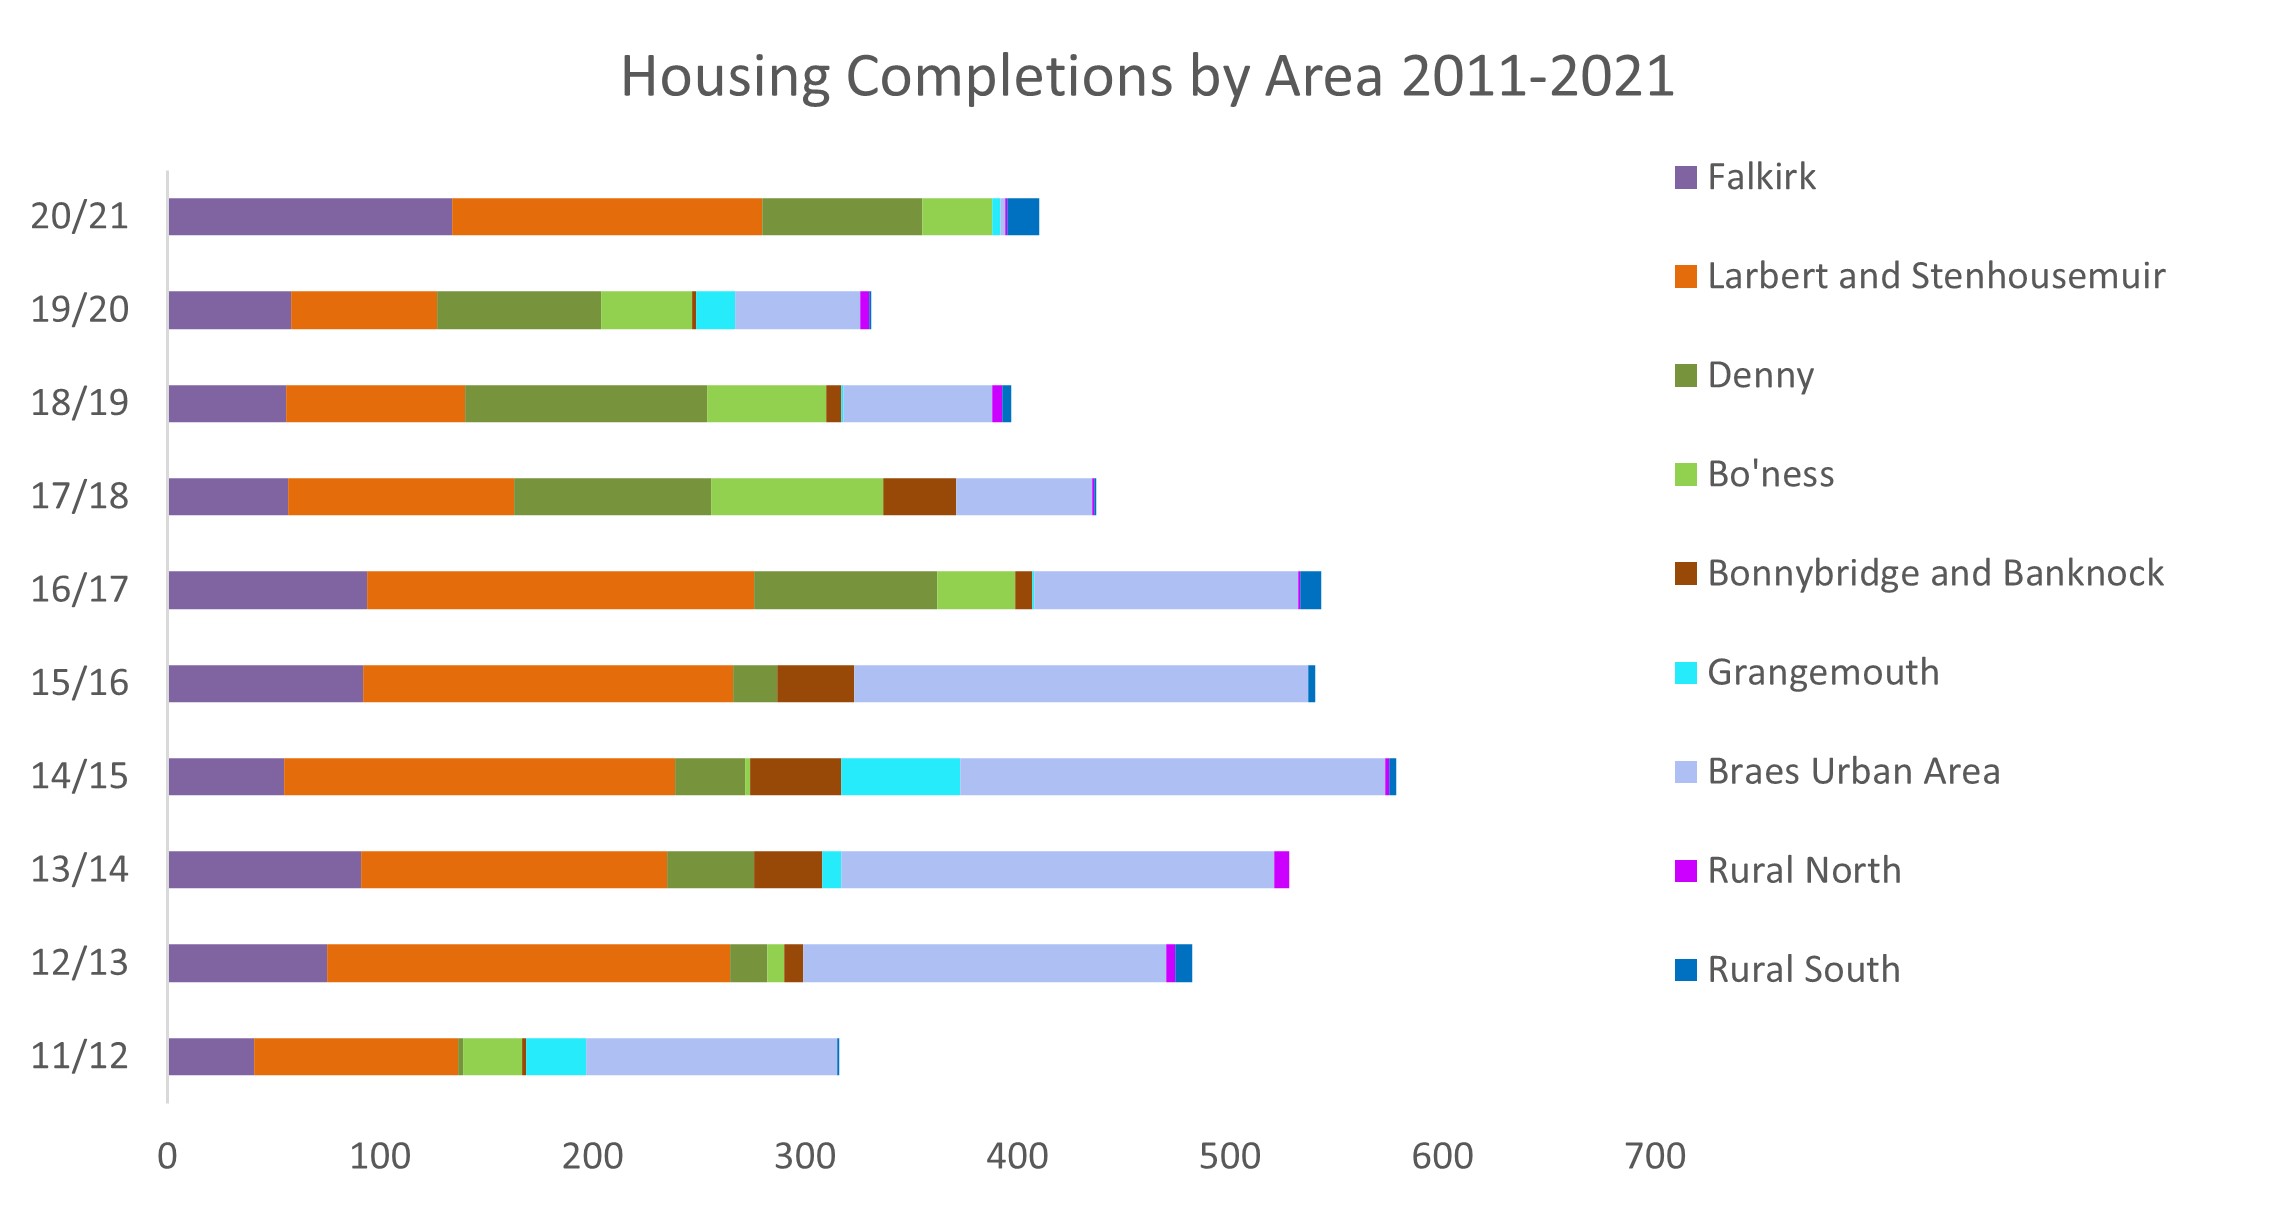 A bar chart showing housing completions from 2011 at the bottom to 2021 at the top by settlement area.